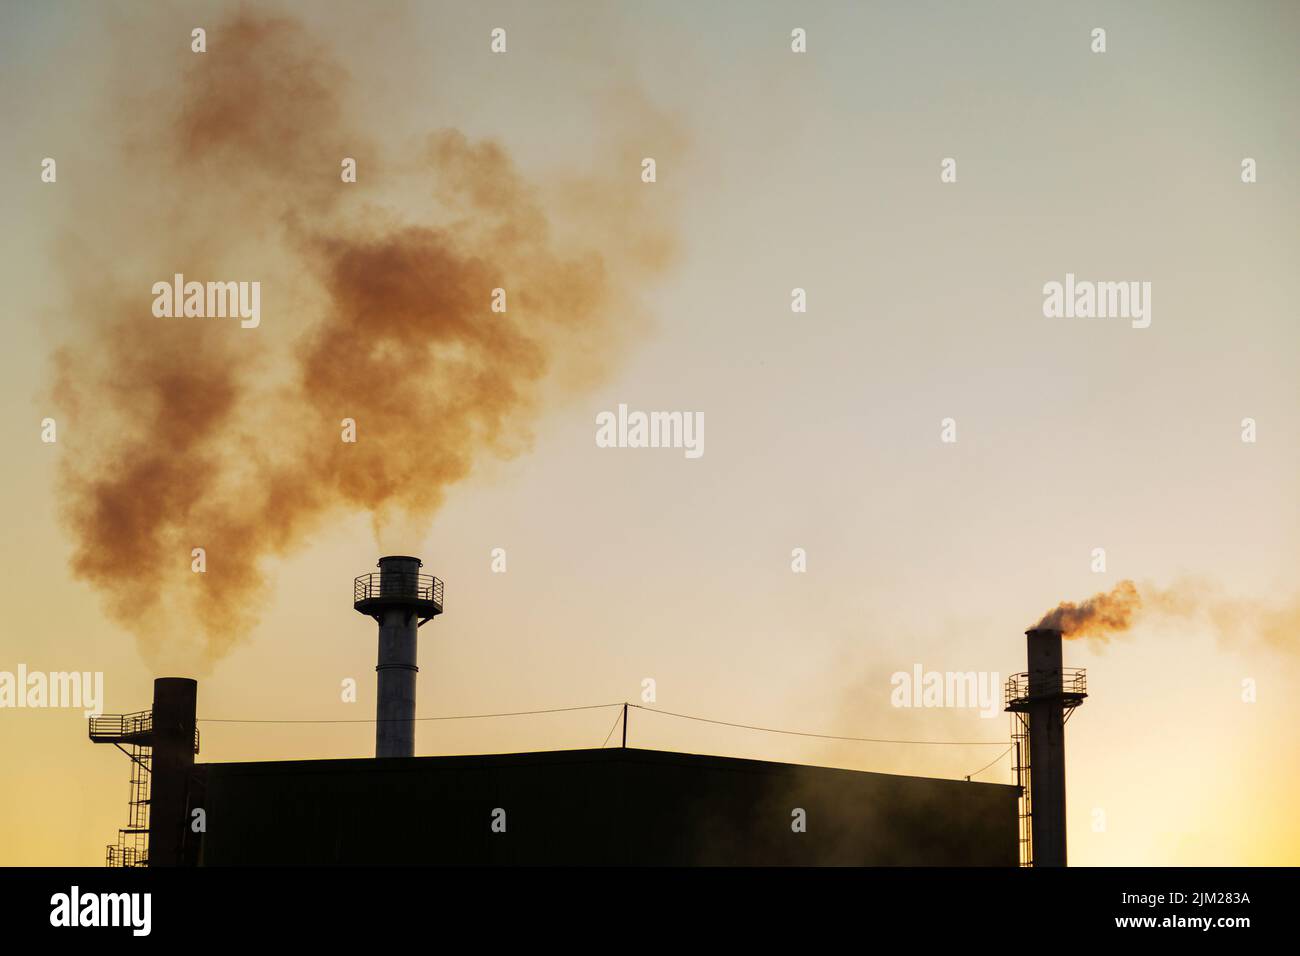 Goiania, Goiás, Brazil – August 04, 2022: Smoke coming out of three chimneys of a factory. Air pollution by smoke coming out of the chimney. Stock Photo